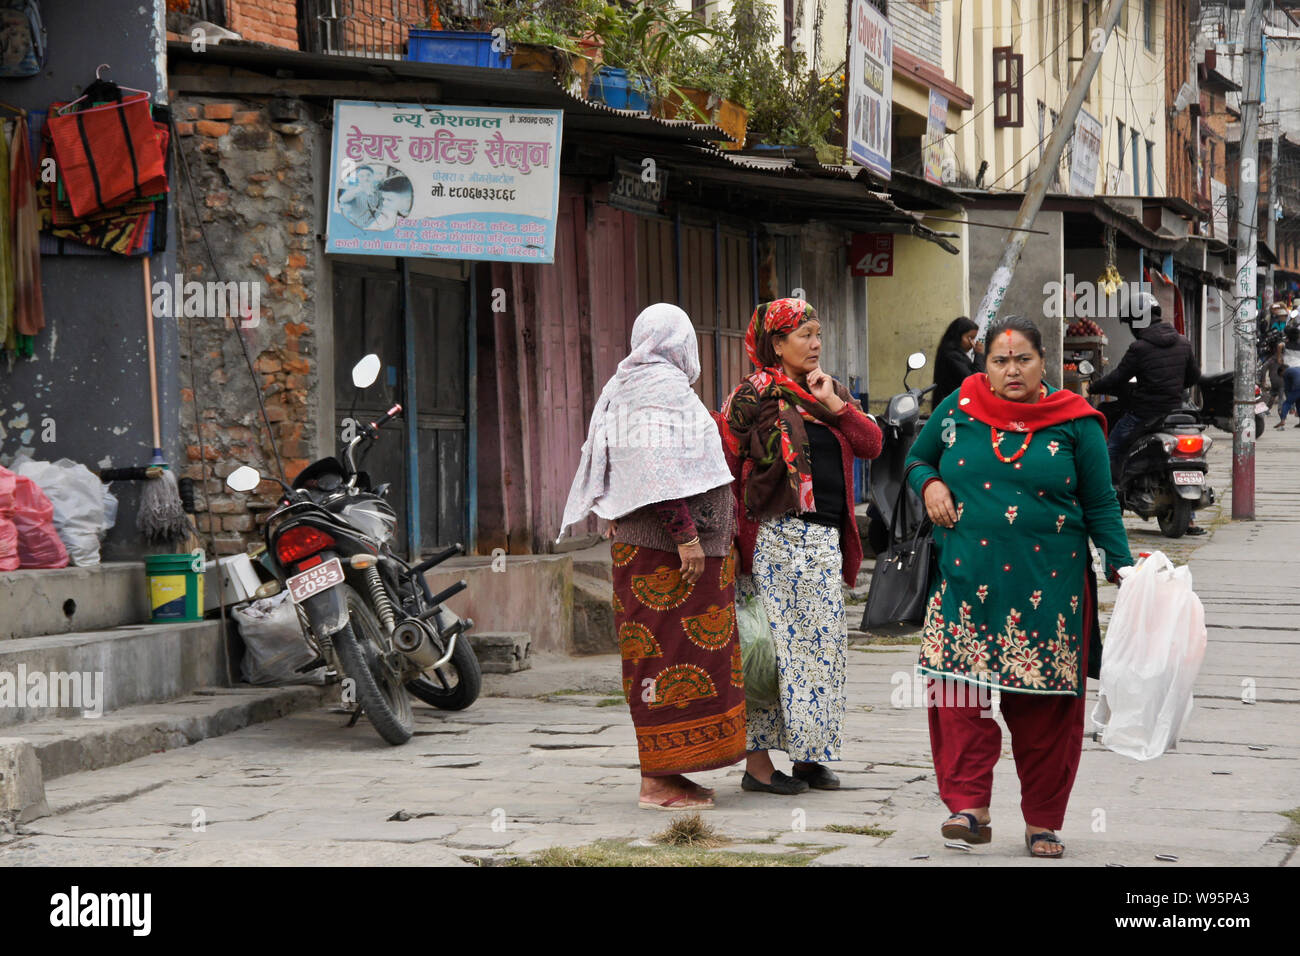 Women in traditional dress in the Old Bazaar area of Pokhara, Nepal Stock Photo